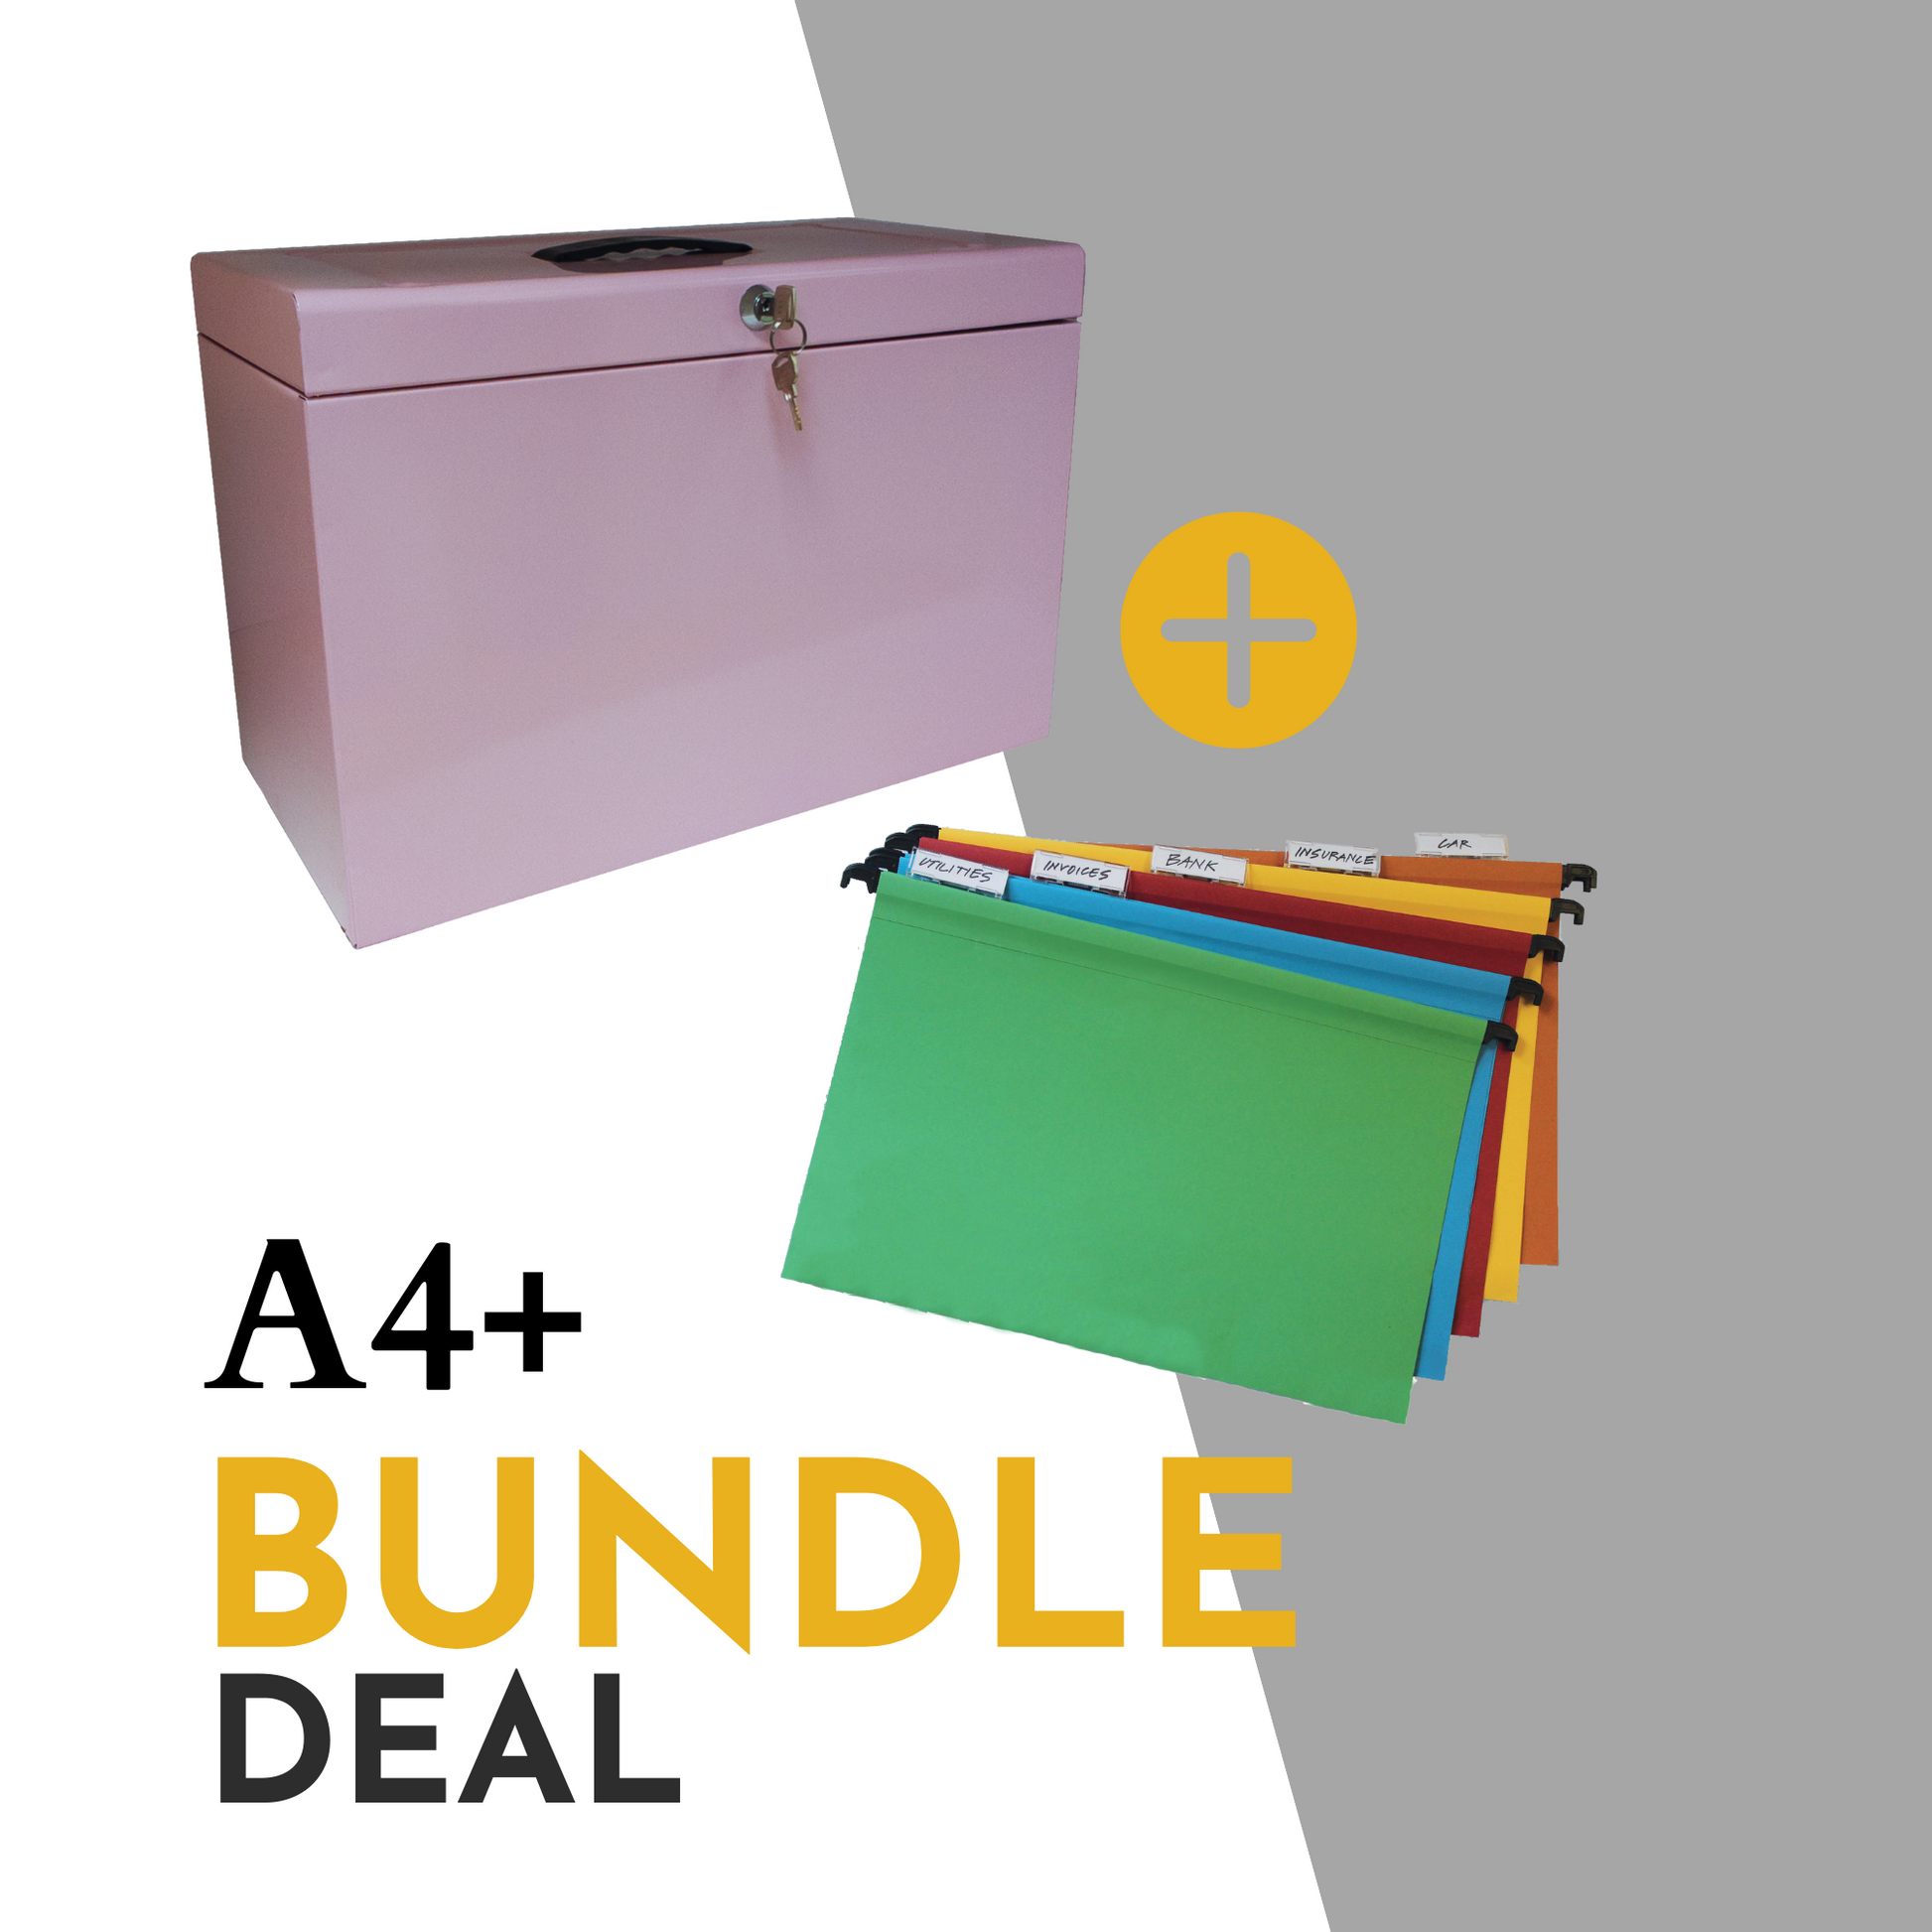 Promotional image for an A4+ (Foolscap Sized) file storage bundle deal, including a pastel pink file box with a handle and key lock, plus an additional set of 10 assorted colour Foolscap suspension files with index tabs, showcasing an organized filing solution.